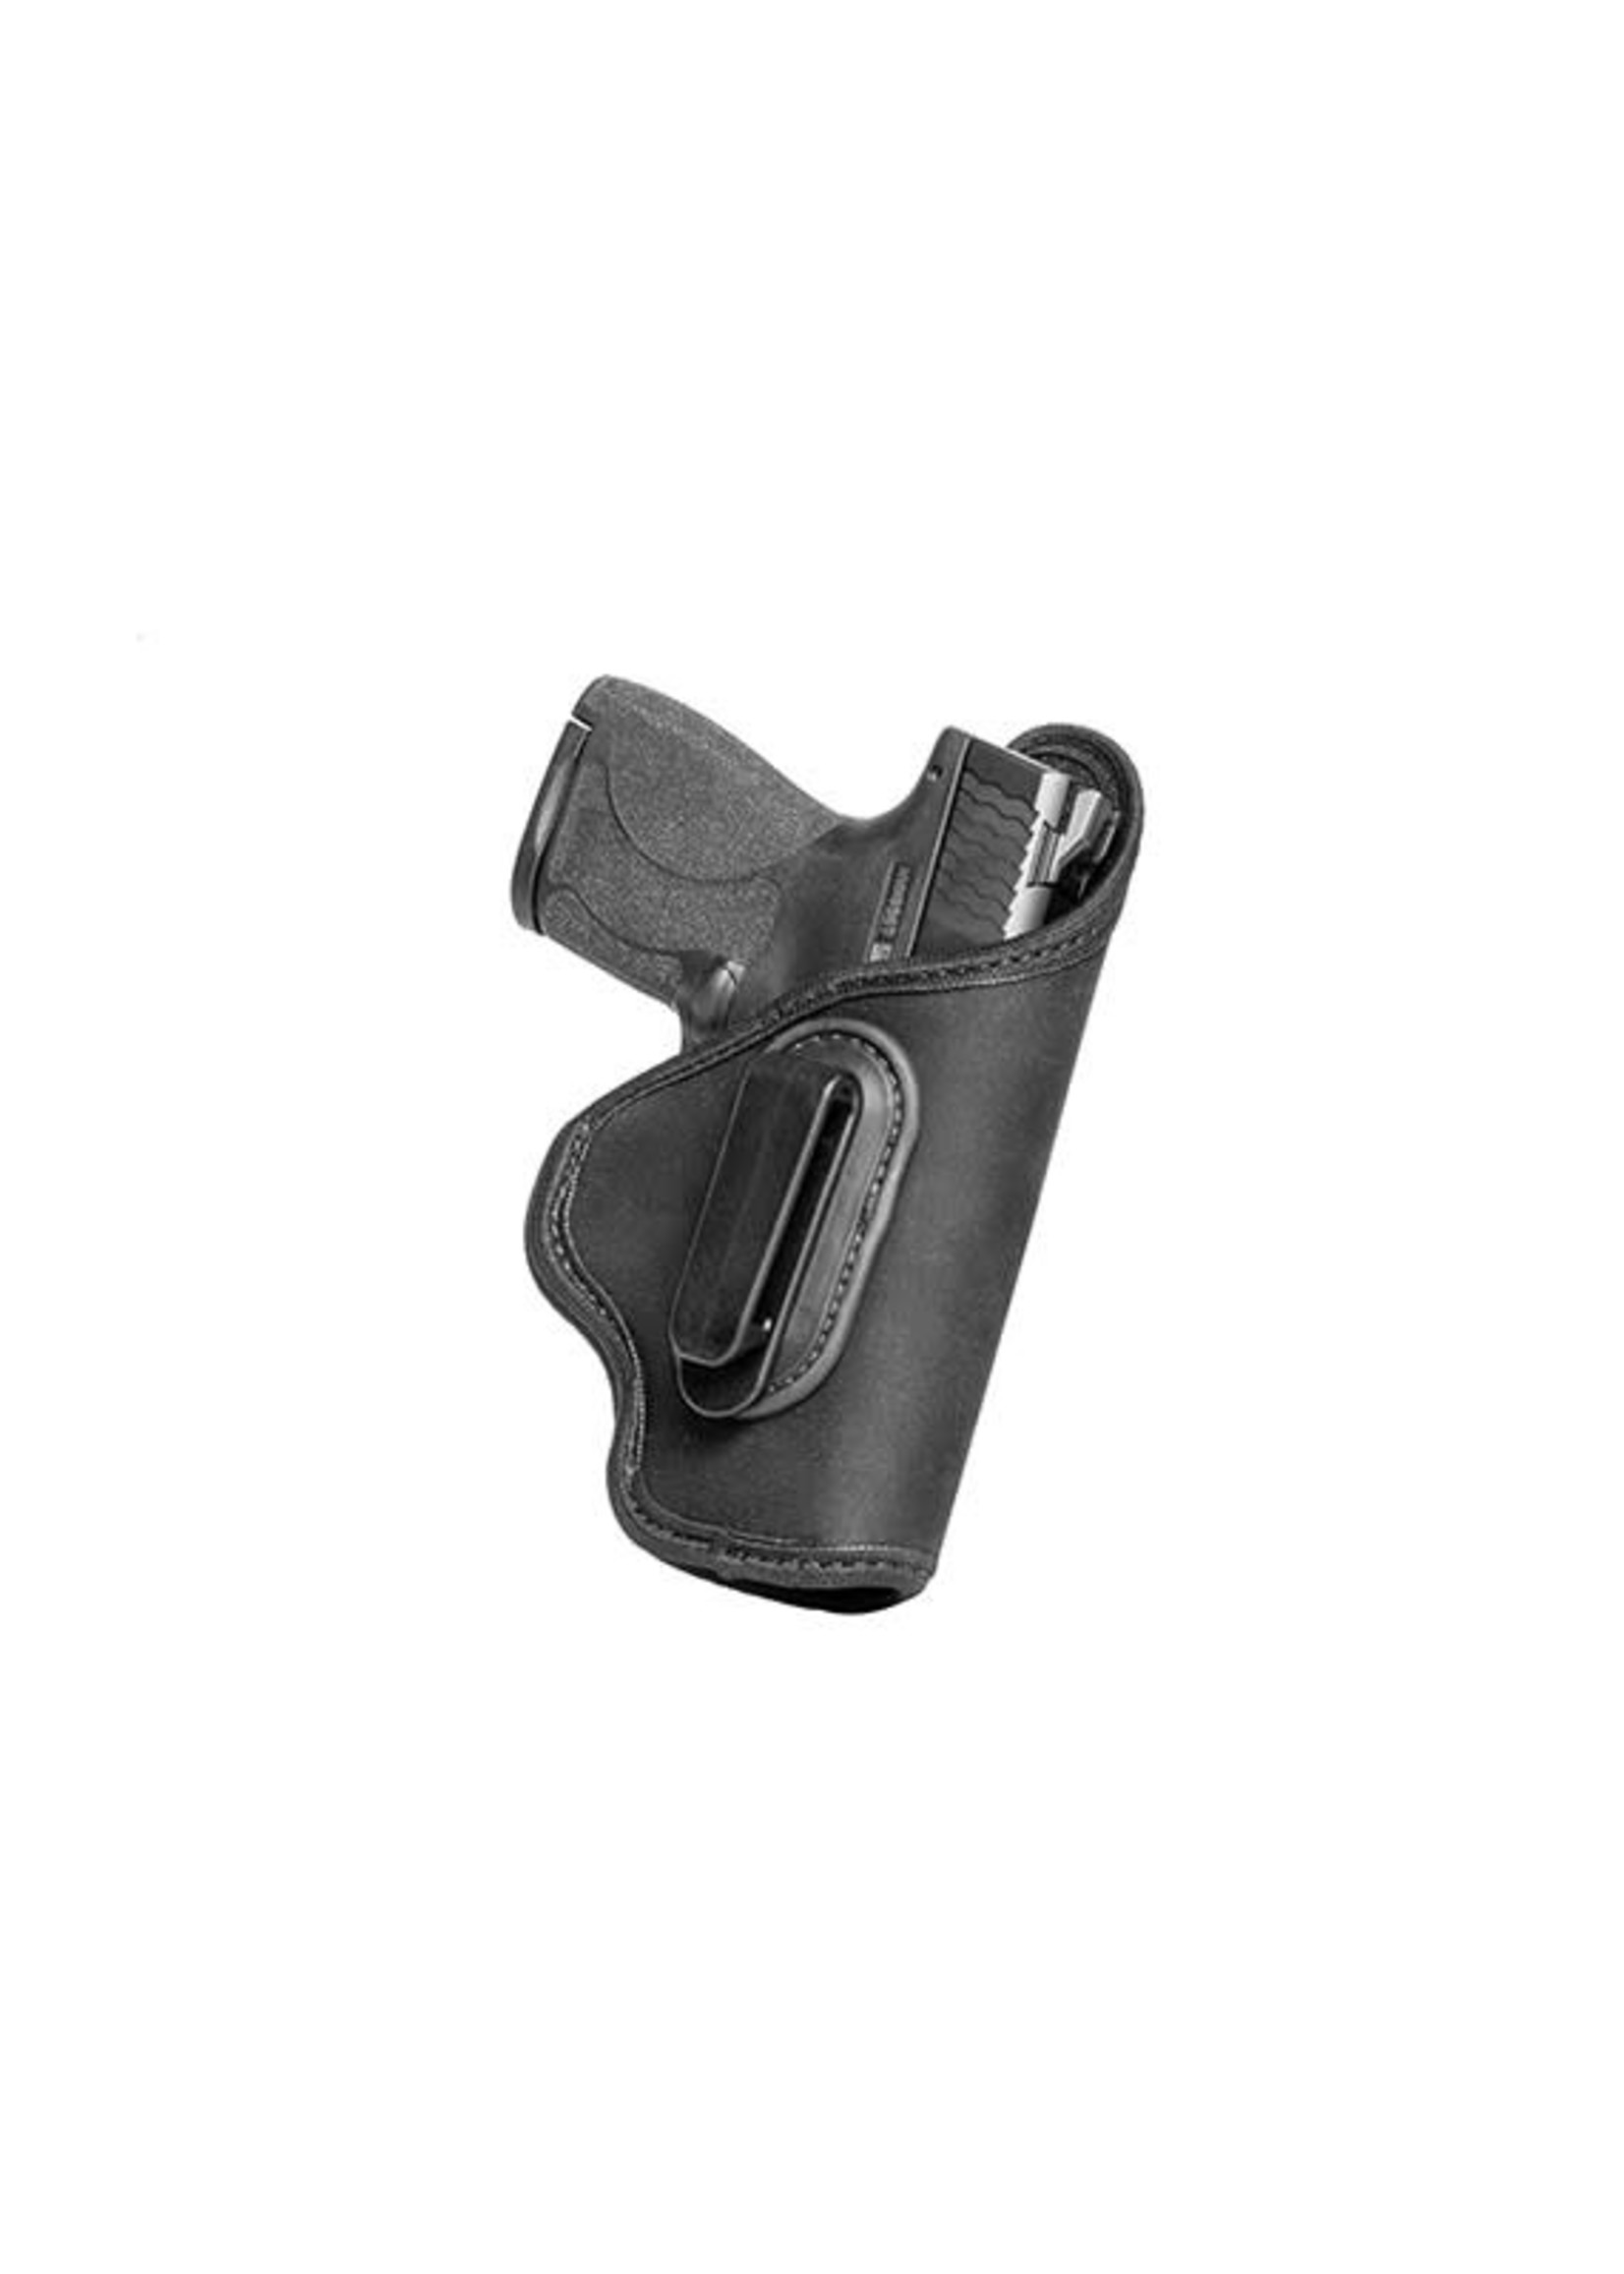 Alien Gear Holsters CLEARANCE Alien Gear Grip Tuck Universal Holster - Compact, LH, Double Stack